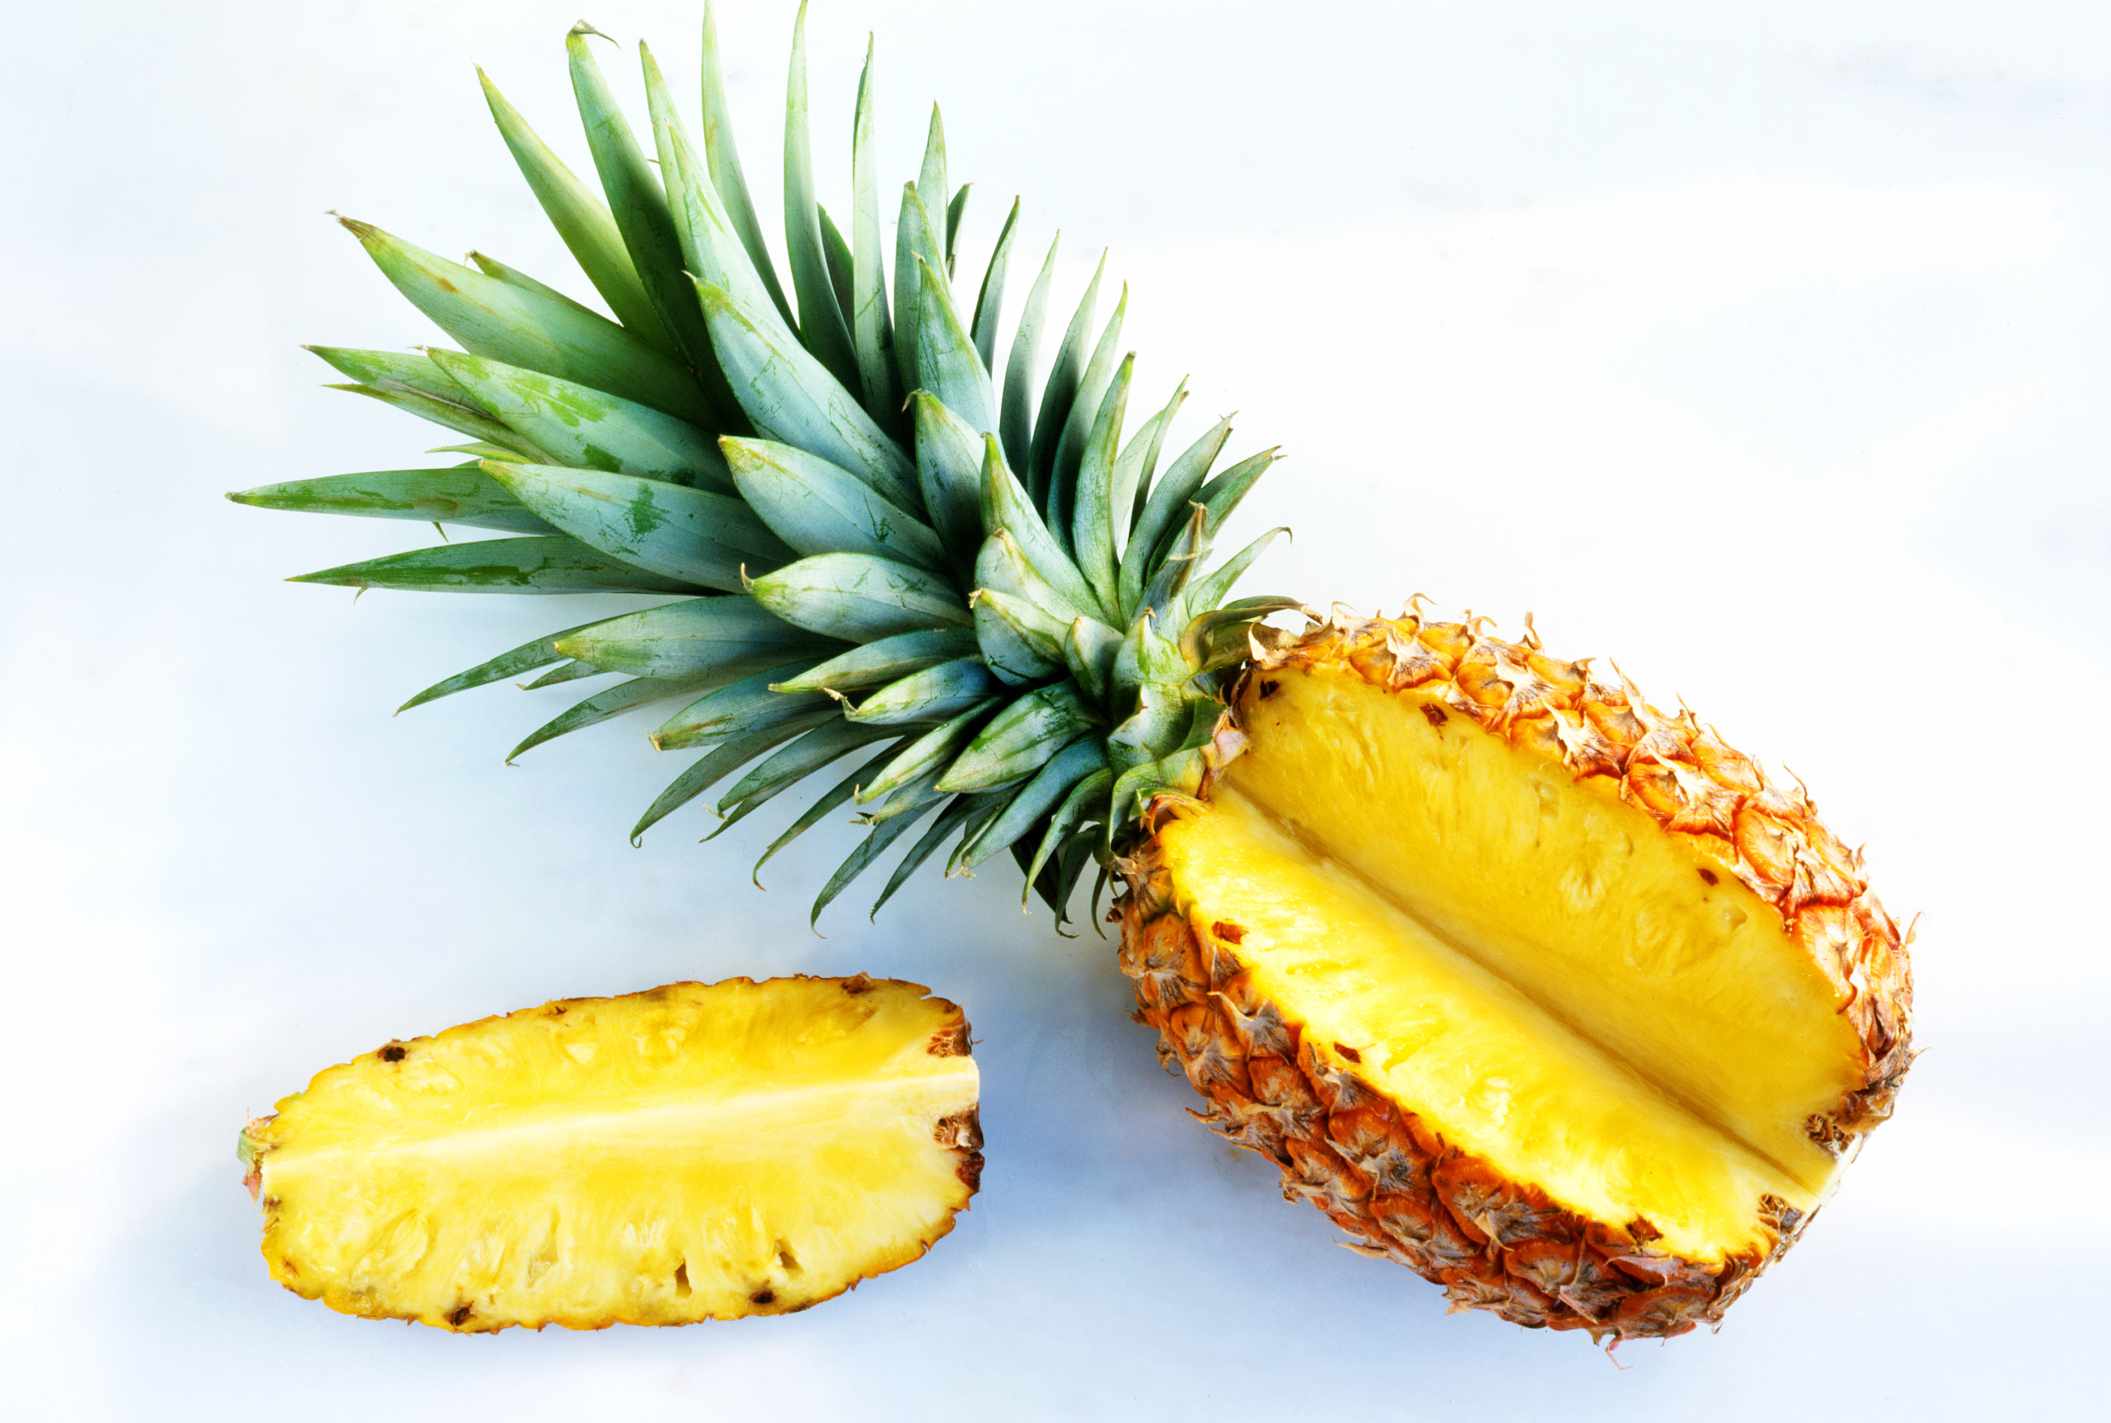  Pineapple Juice Concentrate purchase price + Quality test 